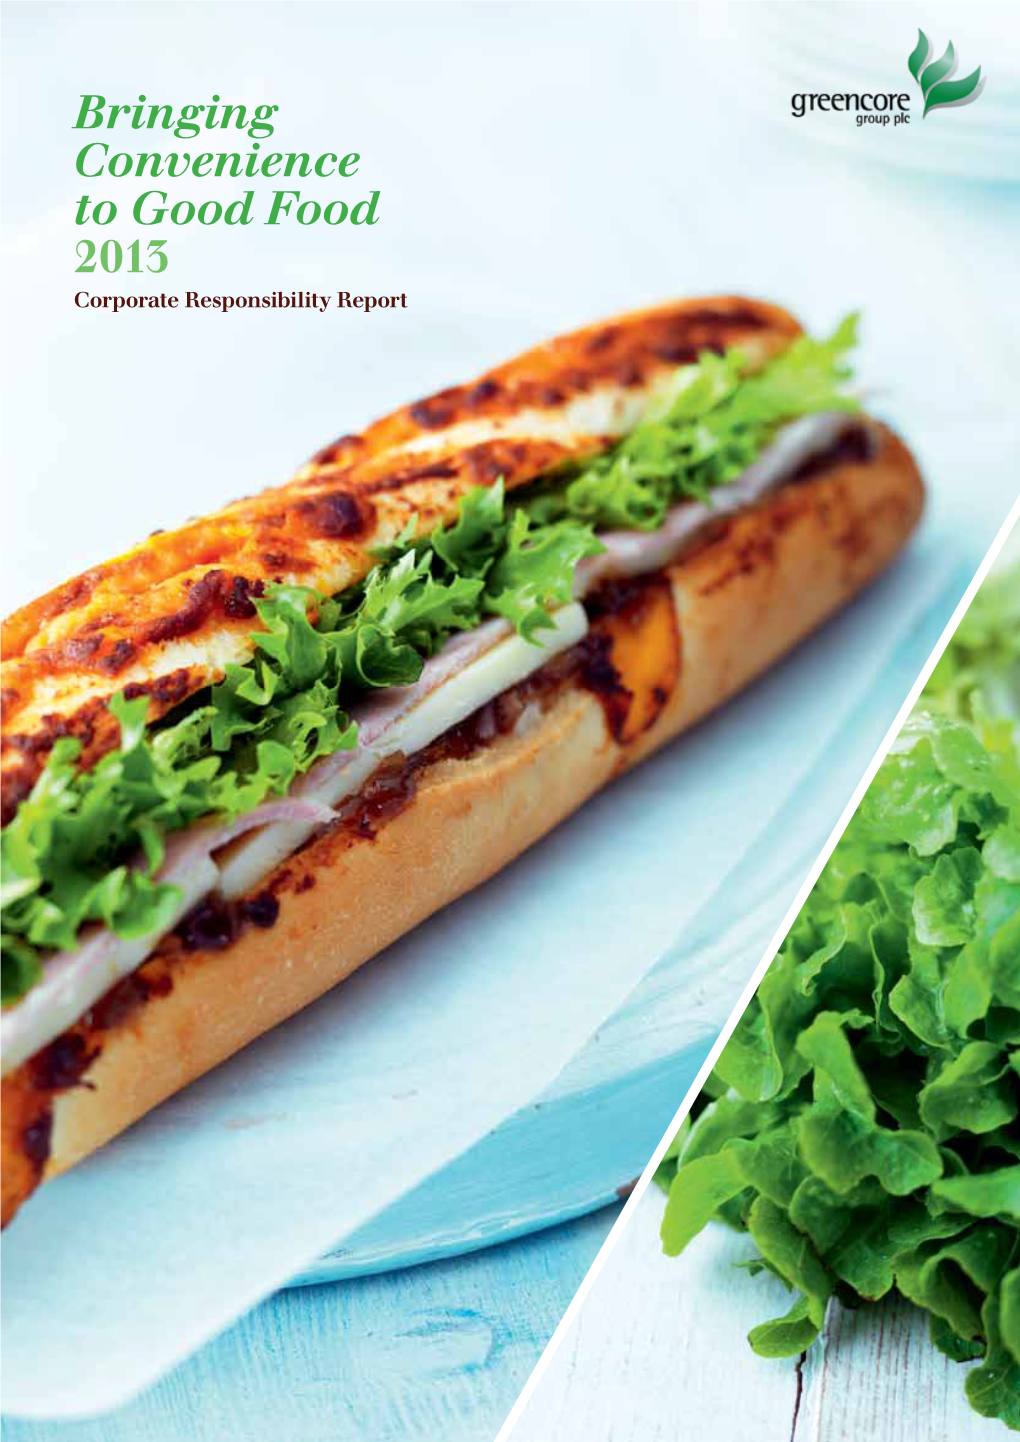 Bringing Convenience to Good Food 2013 Corporate Responsibility Report Greencore Group Plc